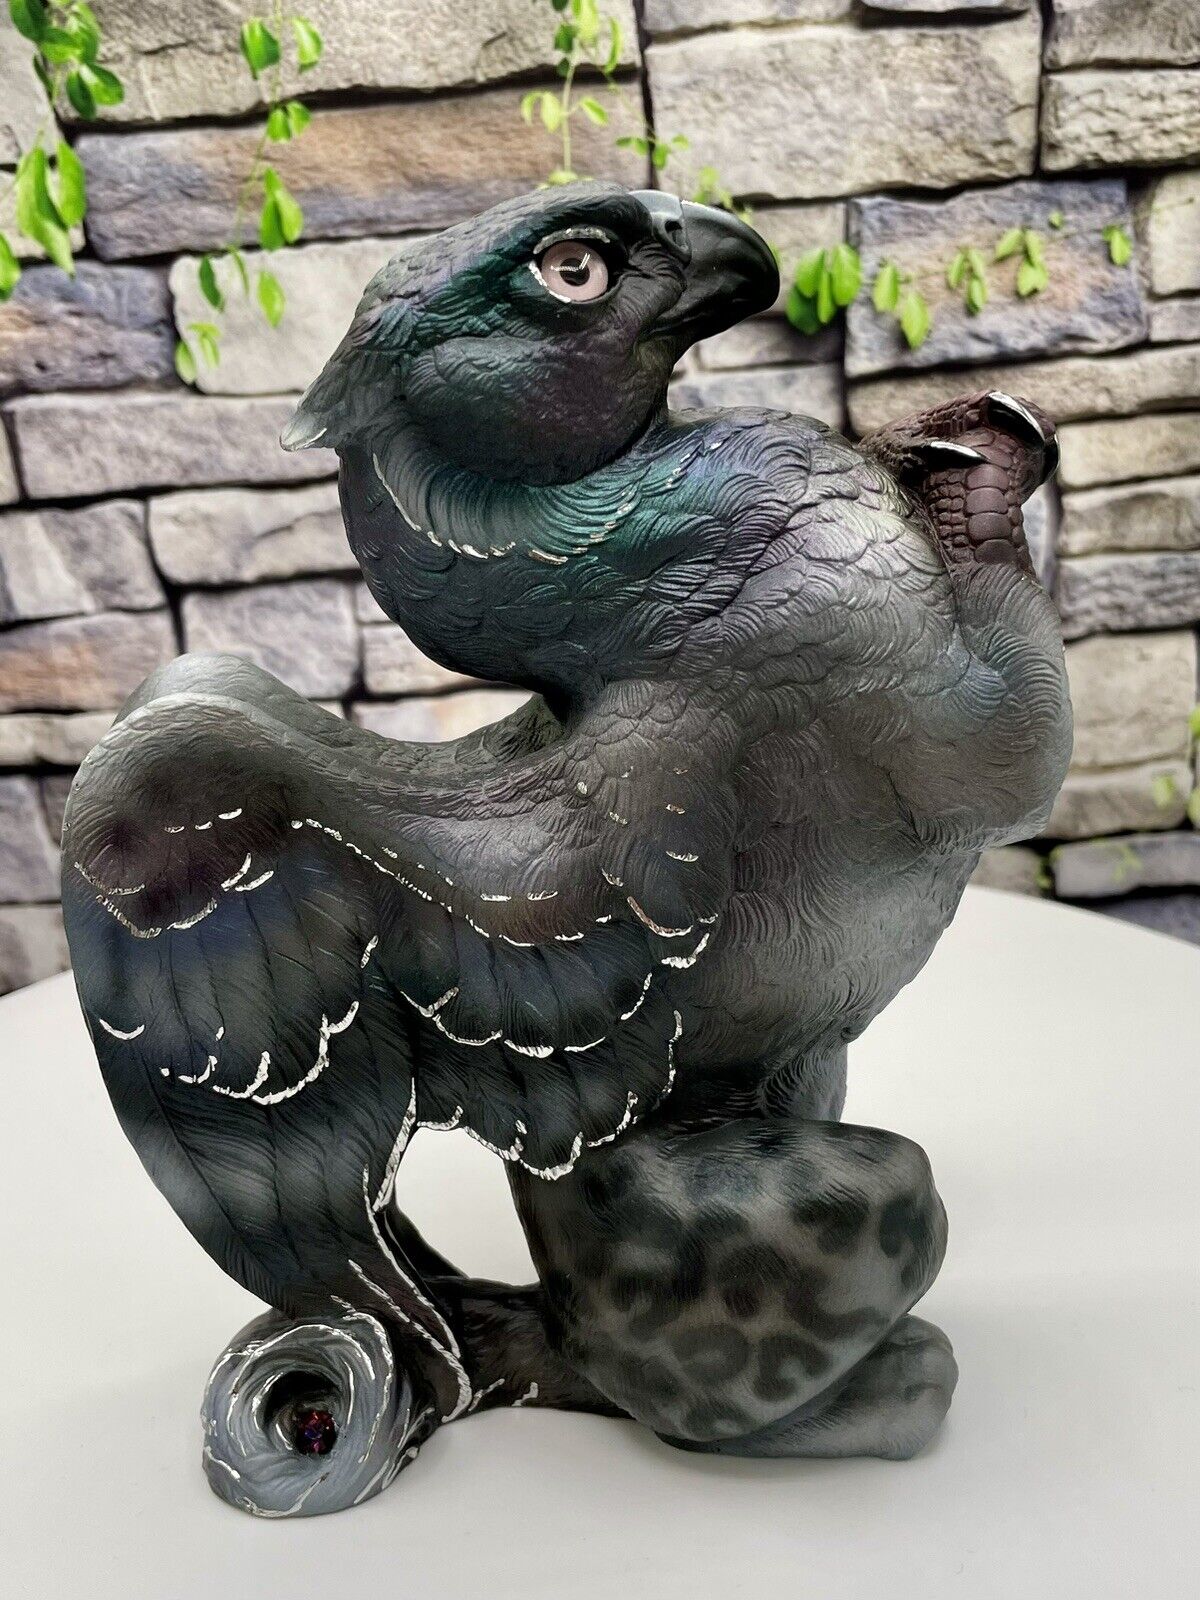 Windstone Editions PYO Griffin “Pigeon”